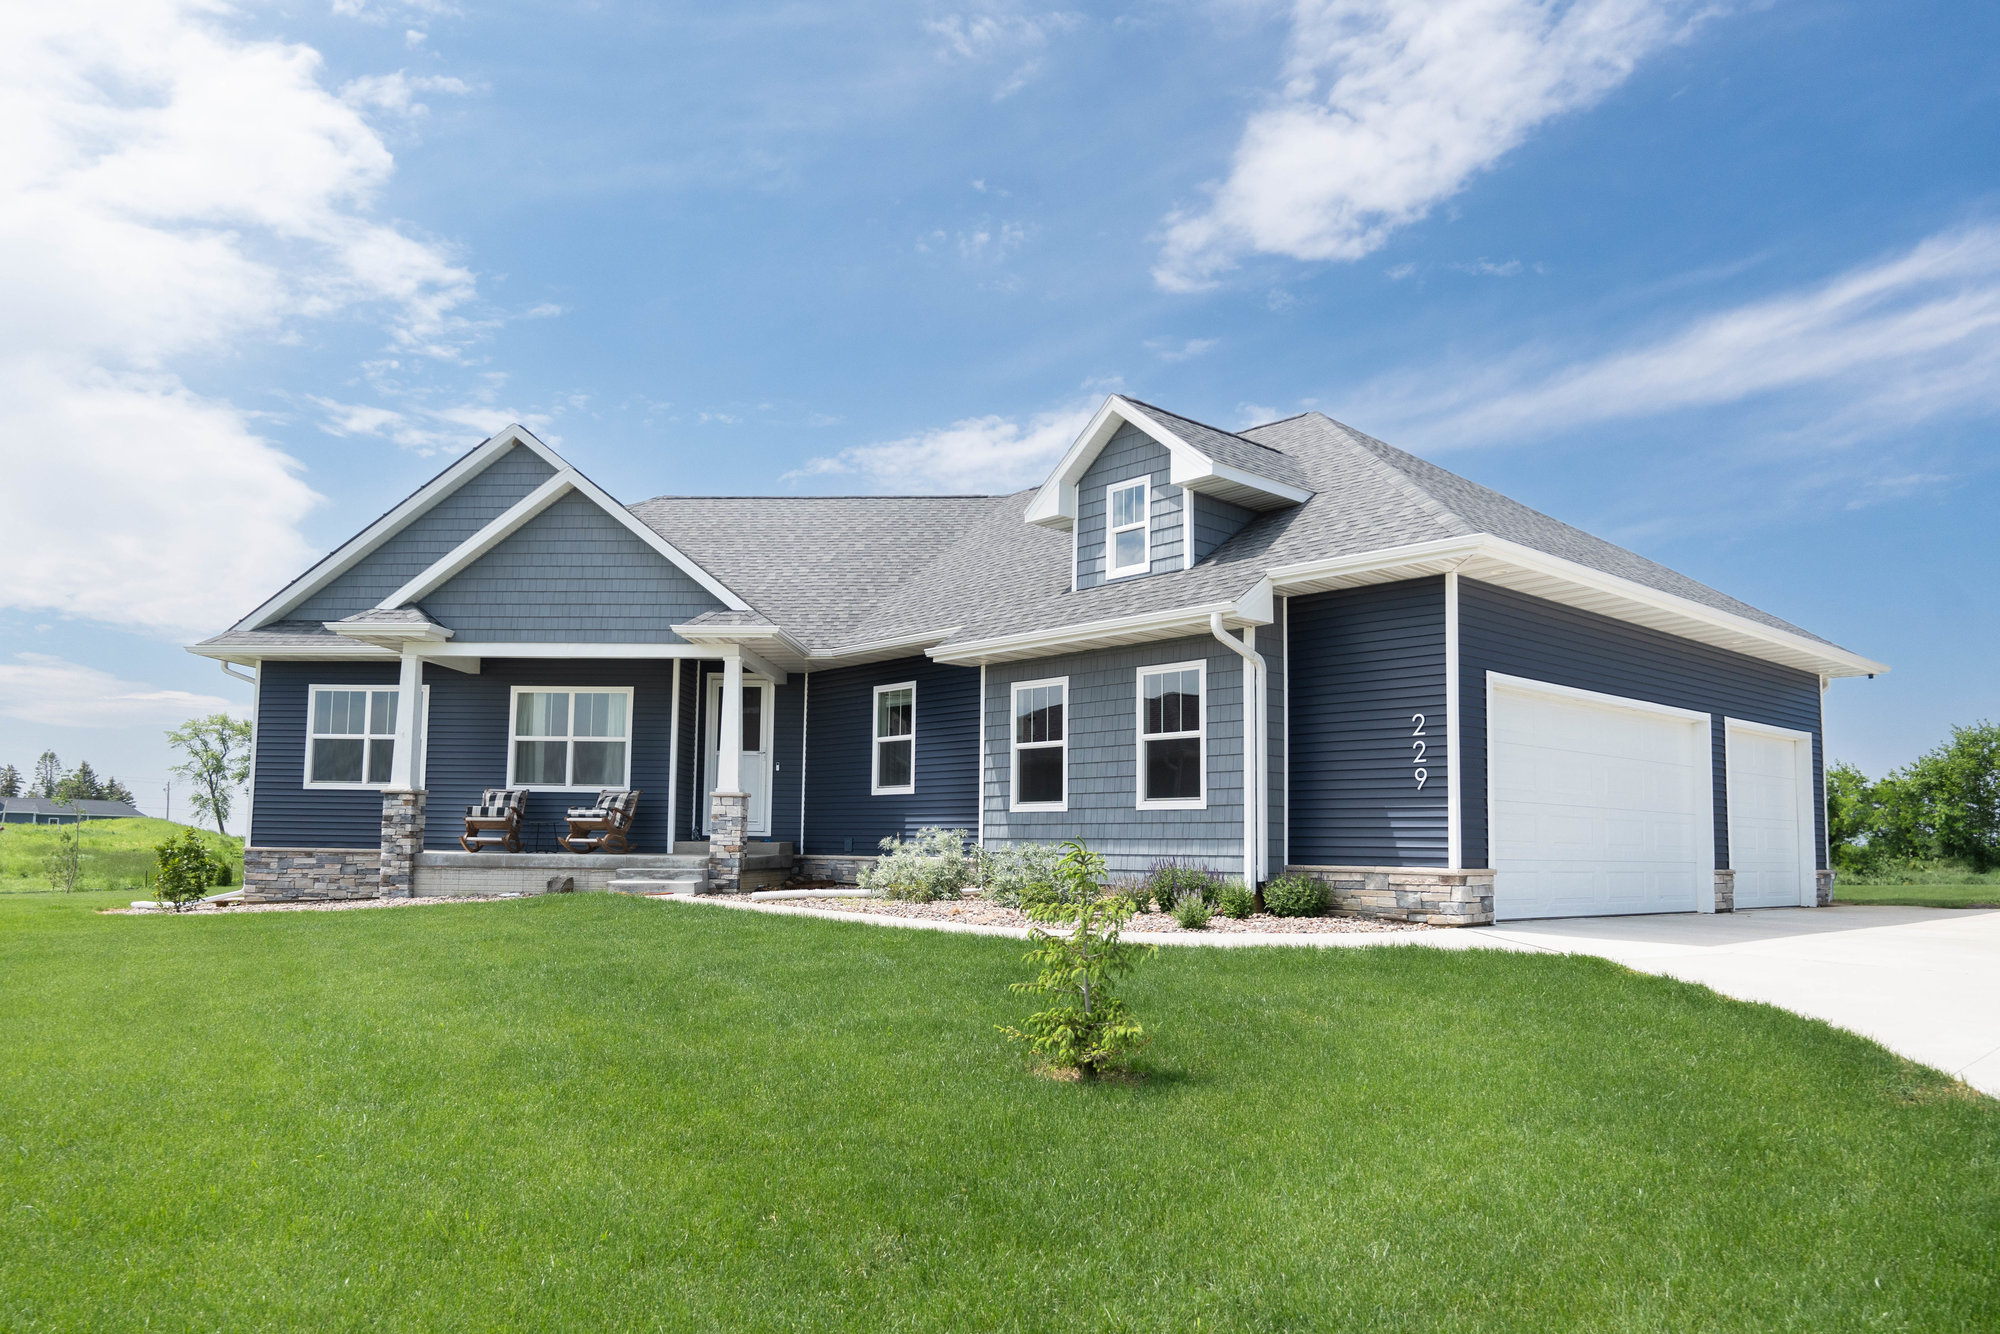 Absolutely stunning ranch home located in hudson iowa